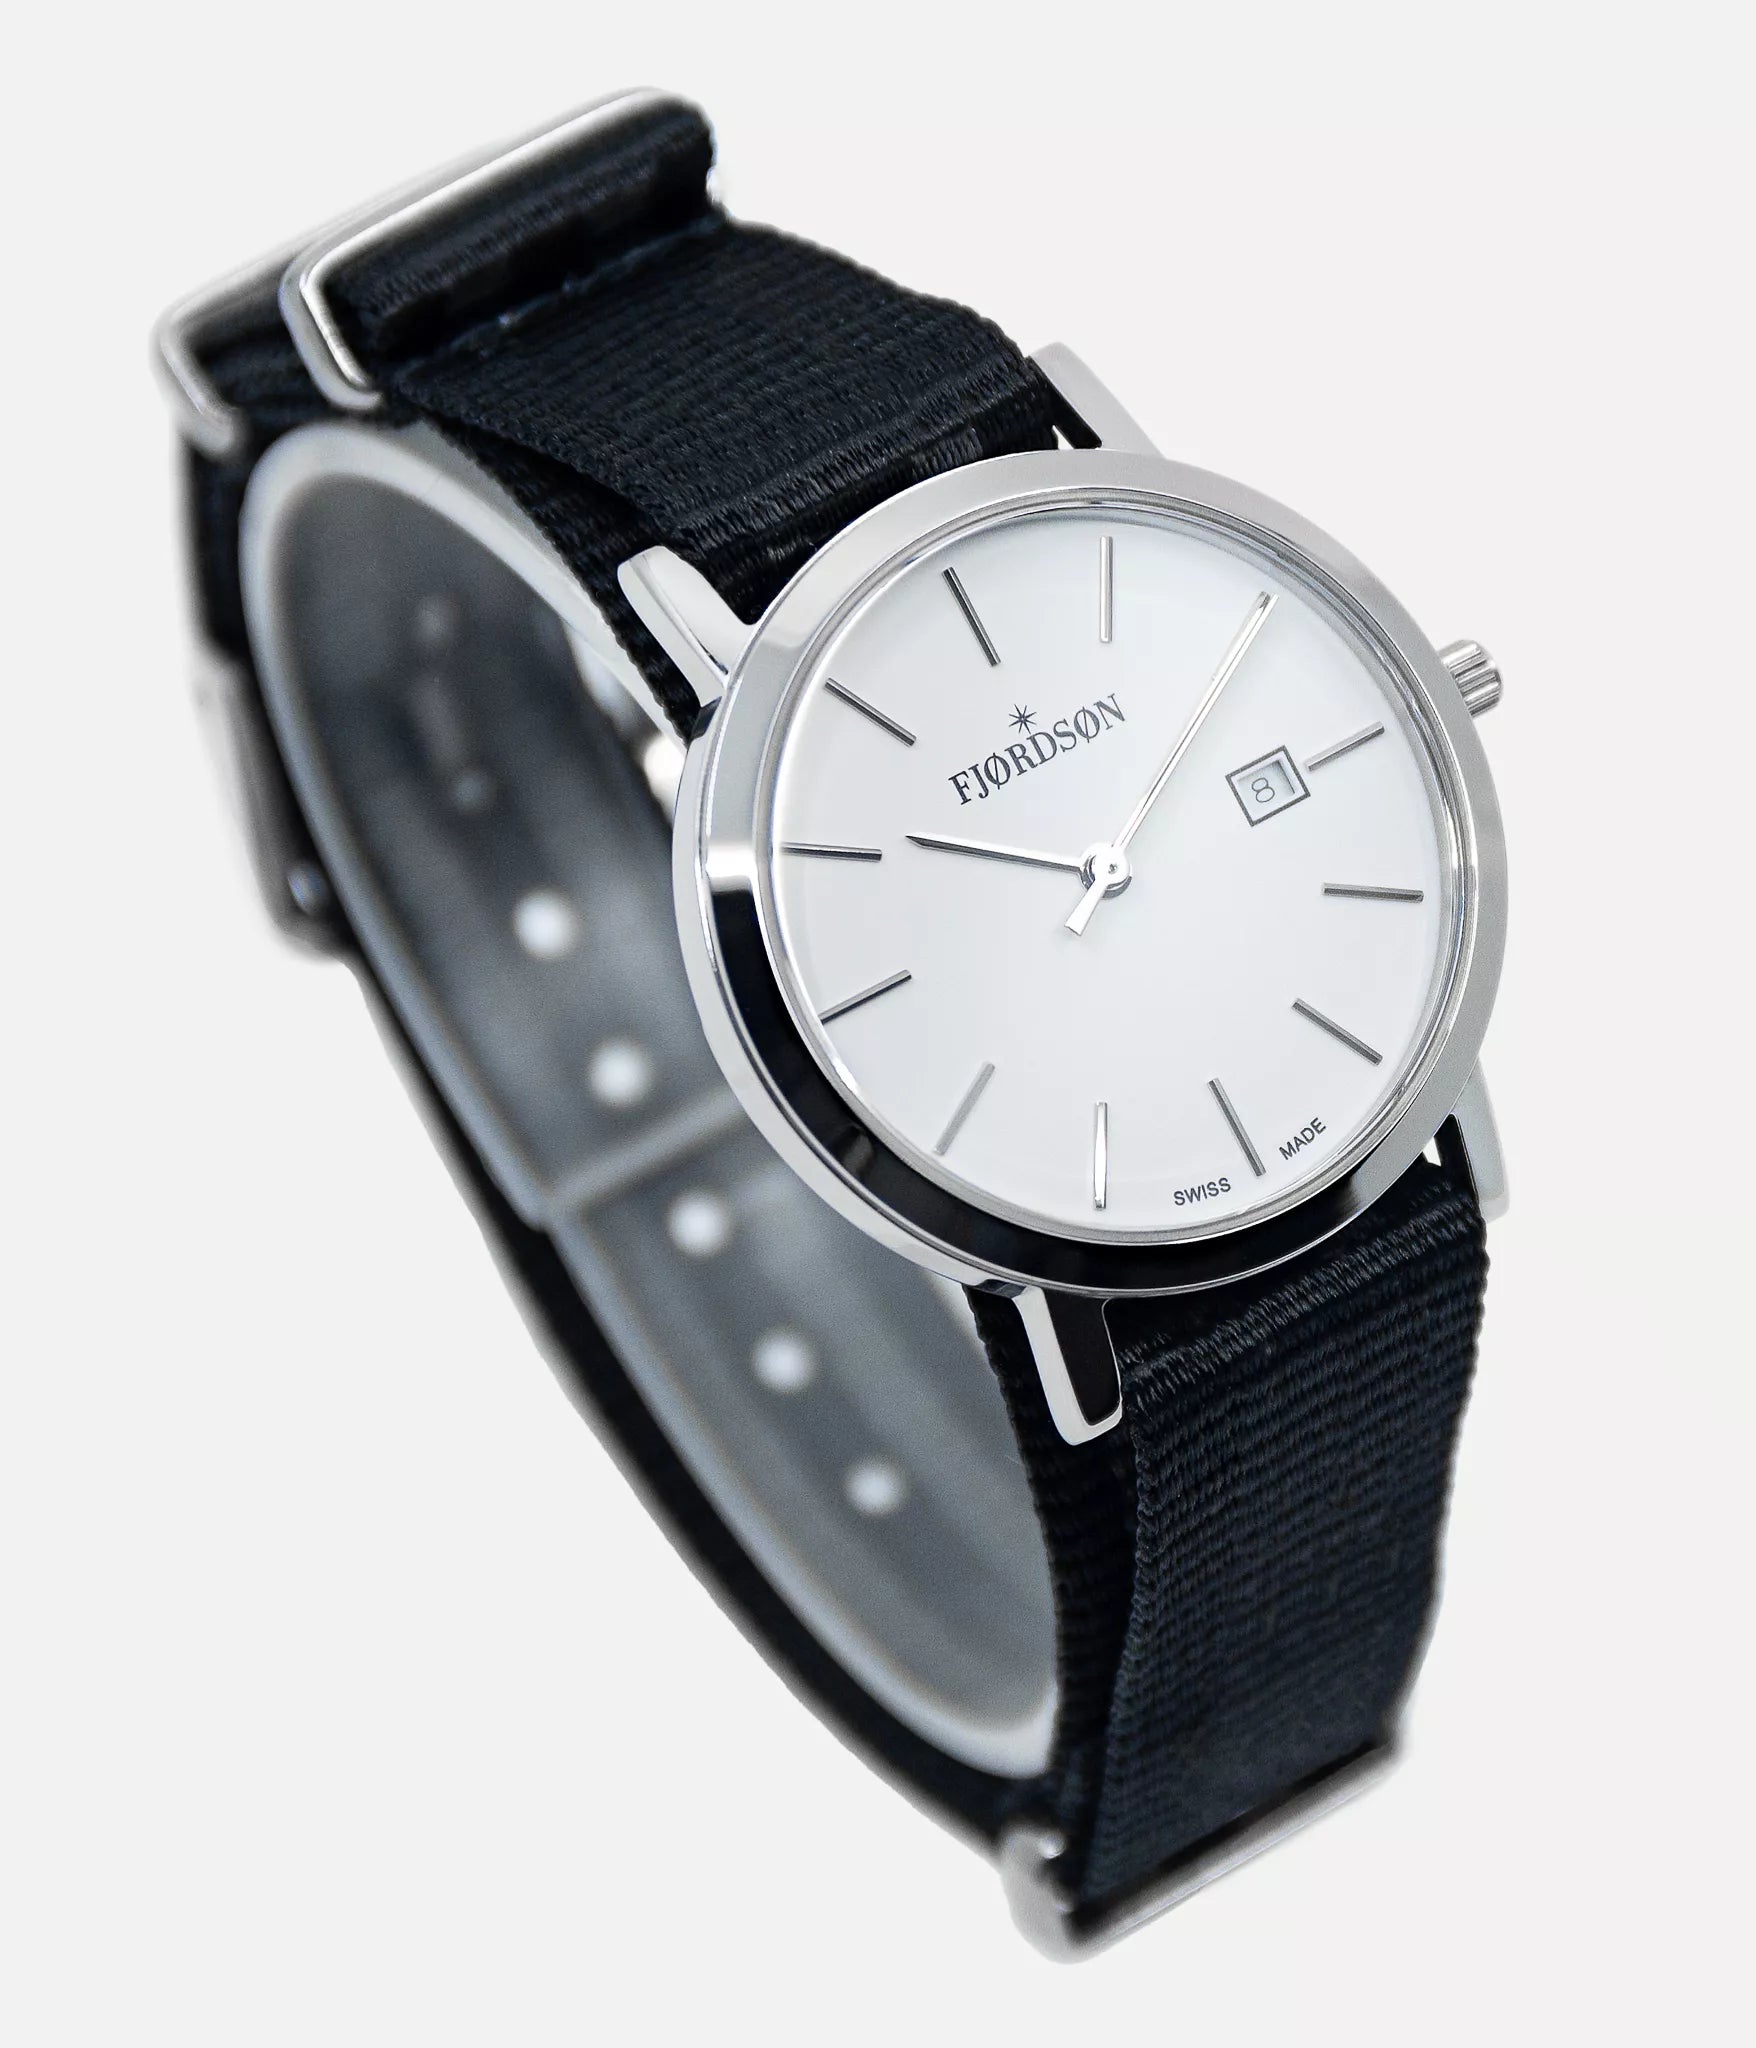 Watch strap on white dial watch shot - Fjordson watch strap 16mm NATO - WOMEN - vegan & approved by PETA - Swiss made